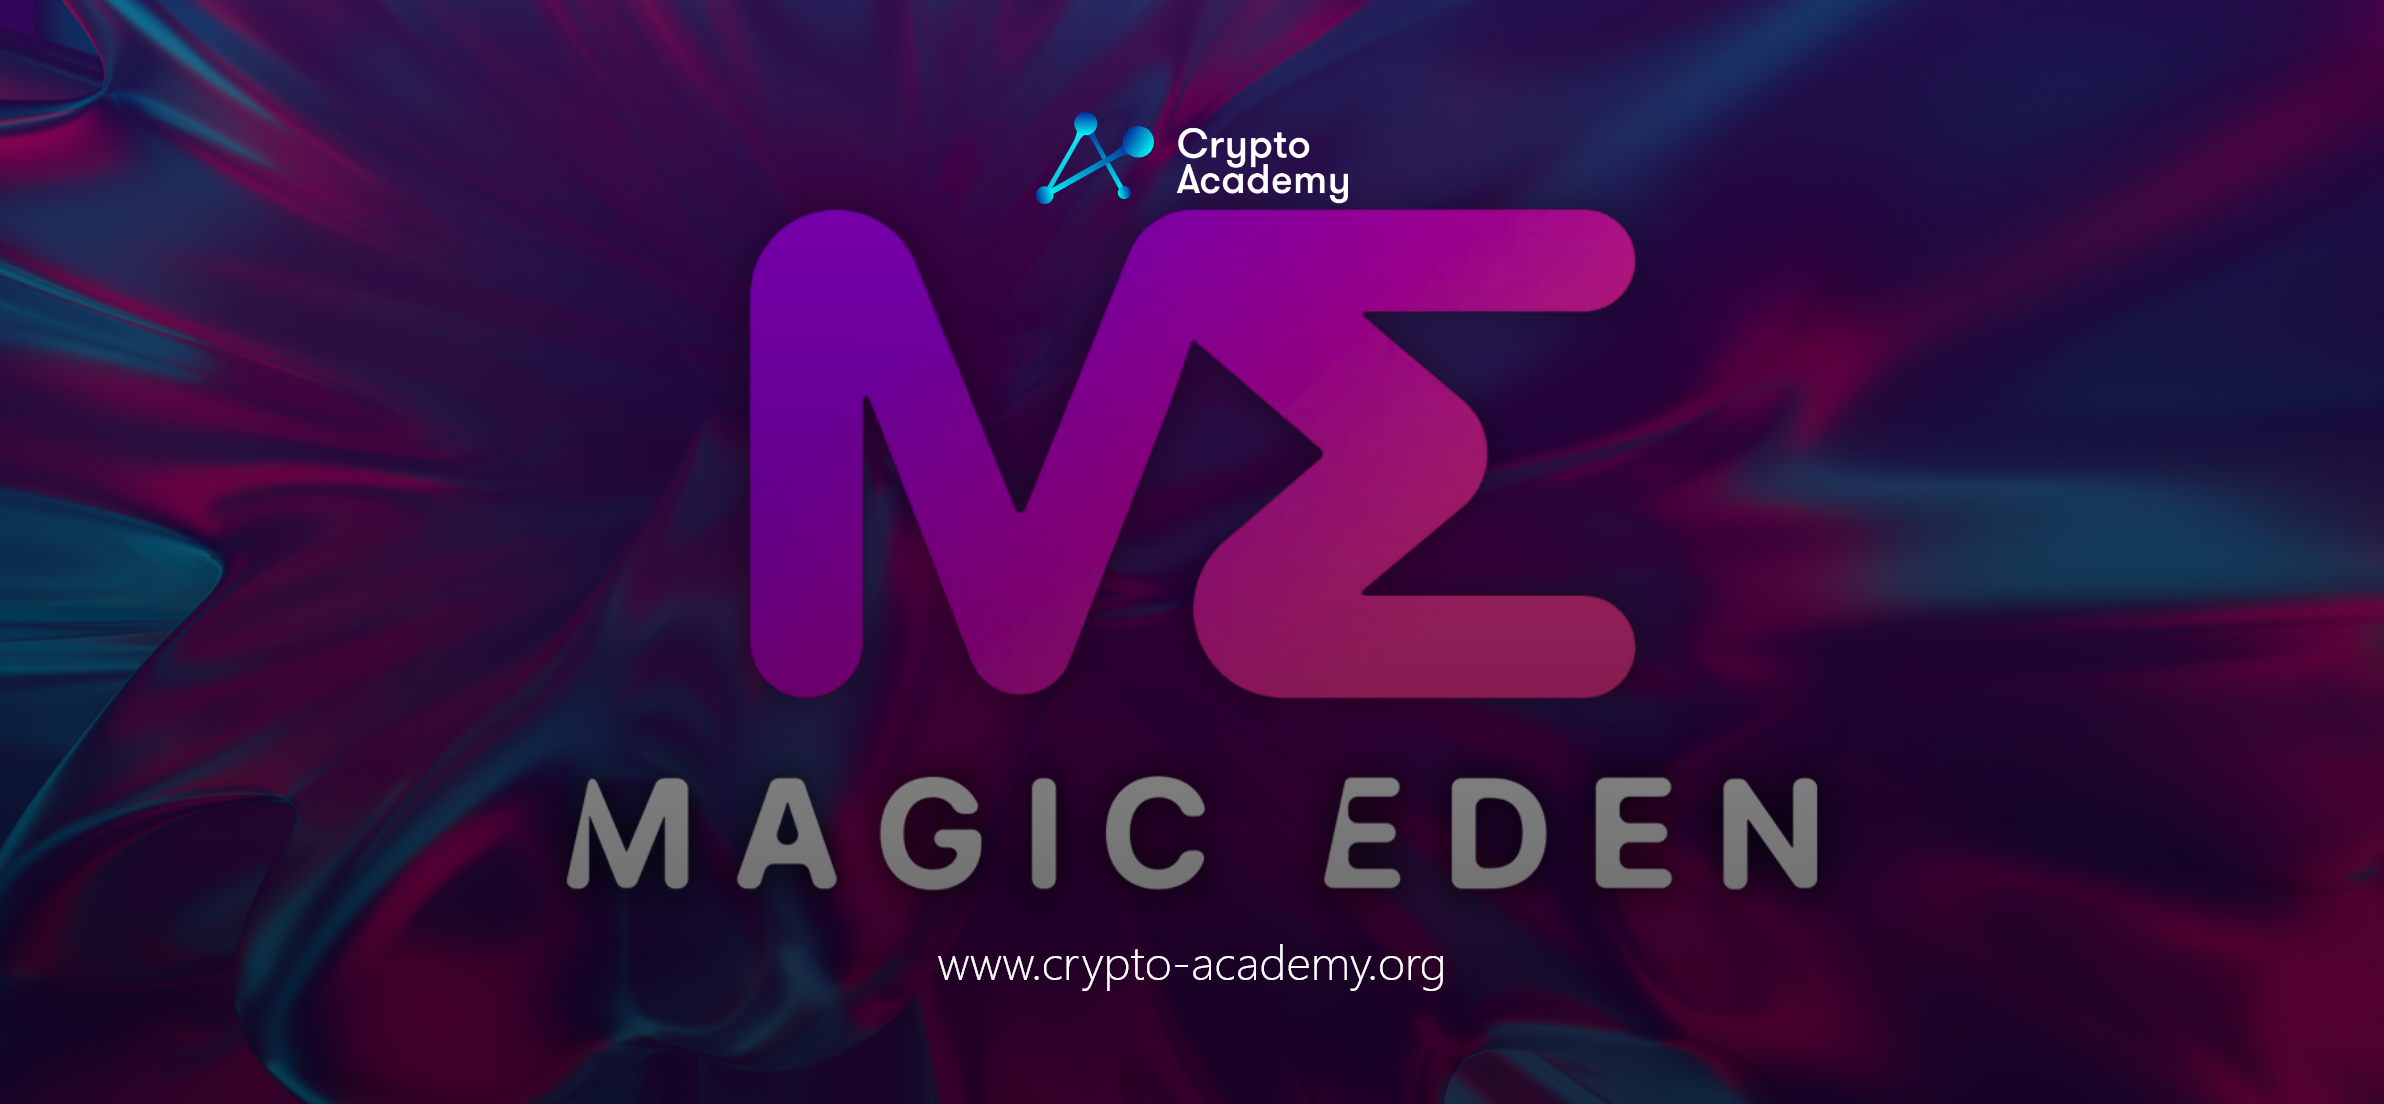 Magic Eden Leads with Runes in Bitcoin Ecosystem